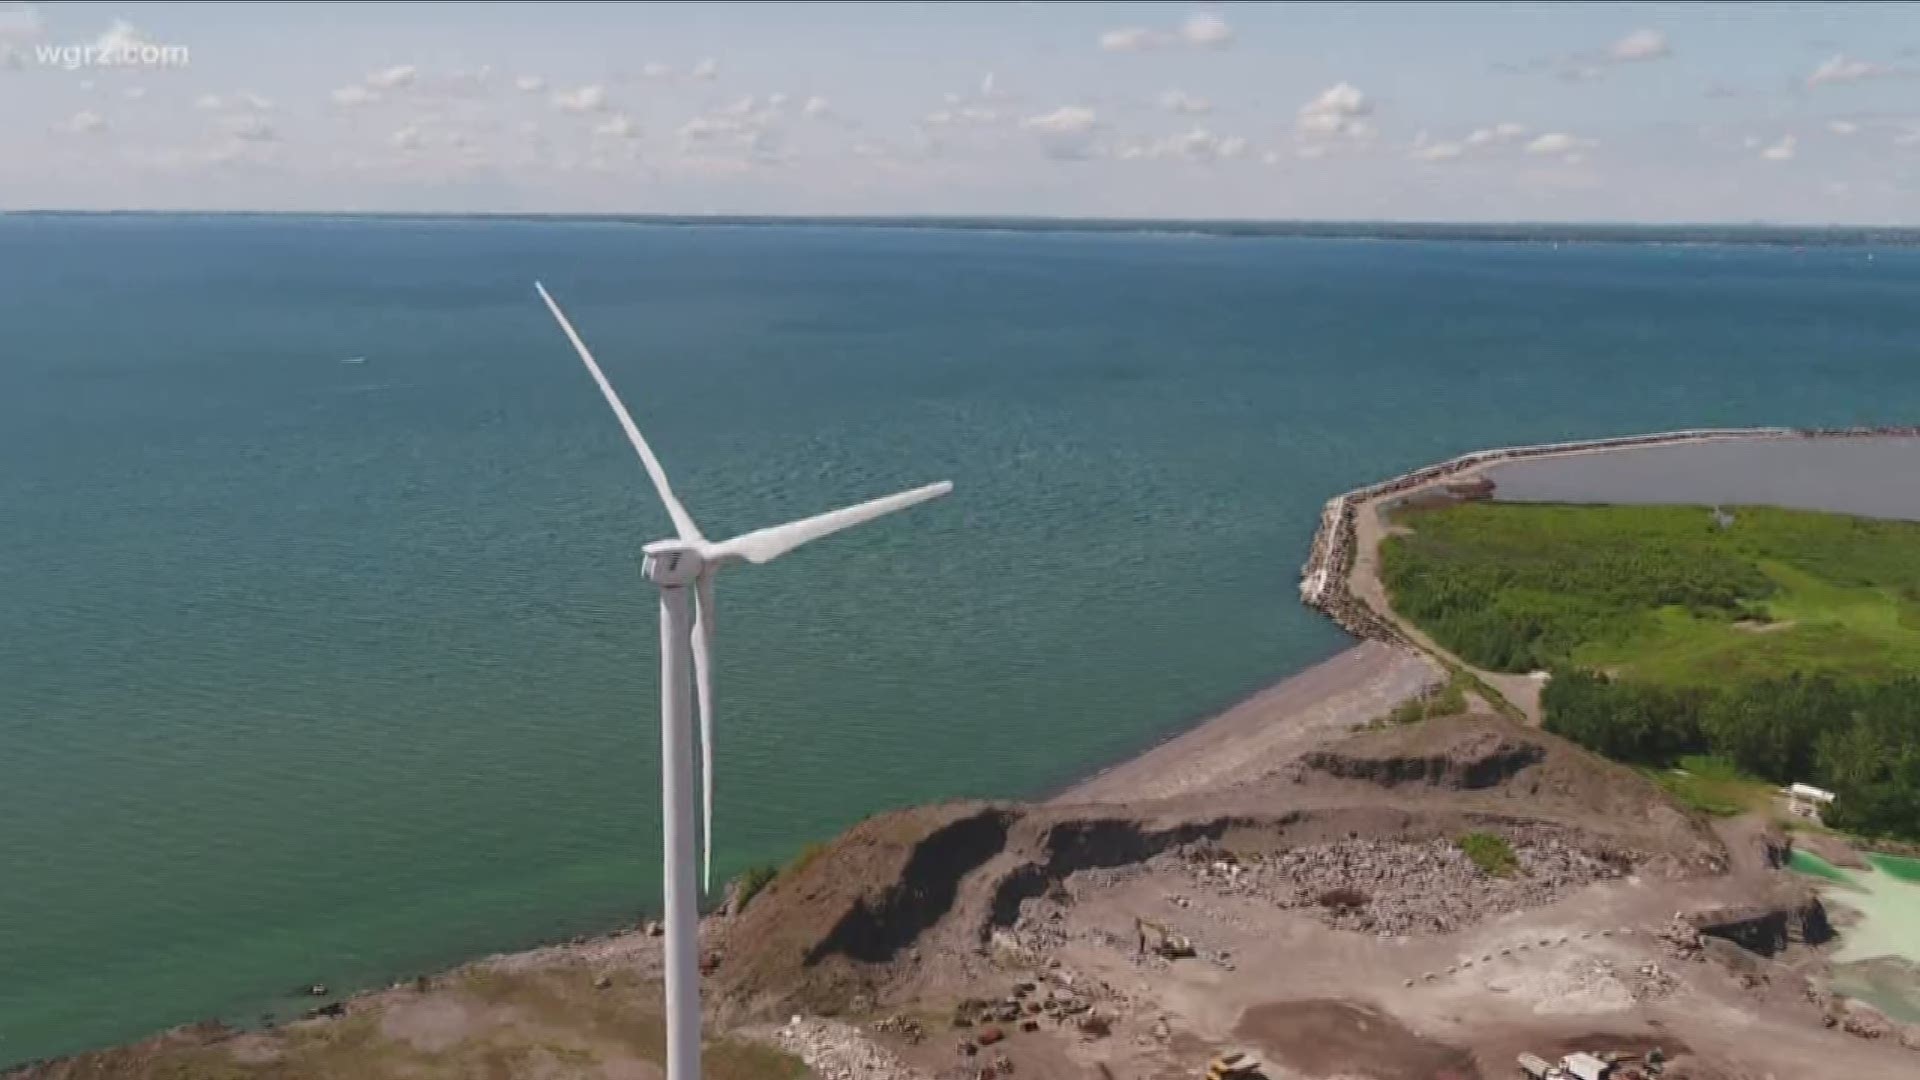 Two Erie County Legislatures are proposing a ban on installing wind turbines in Lake Erie. Several state lawmakers have also come out against the proposal.